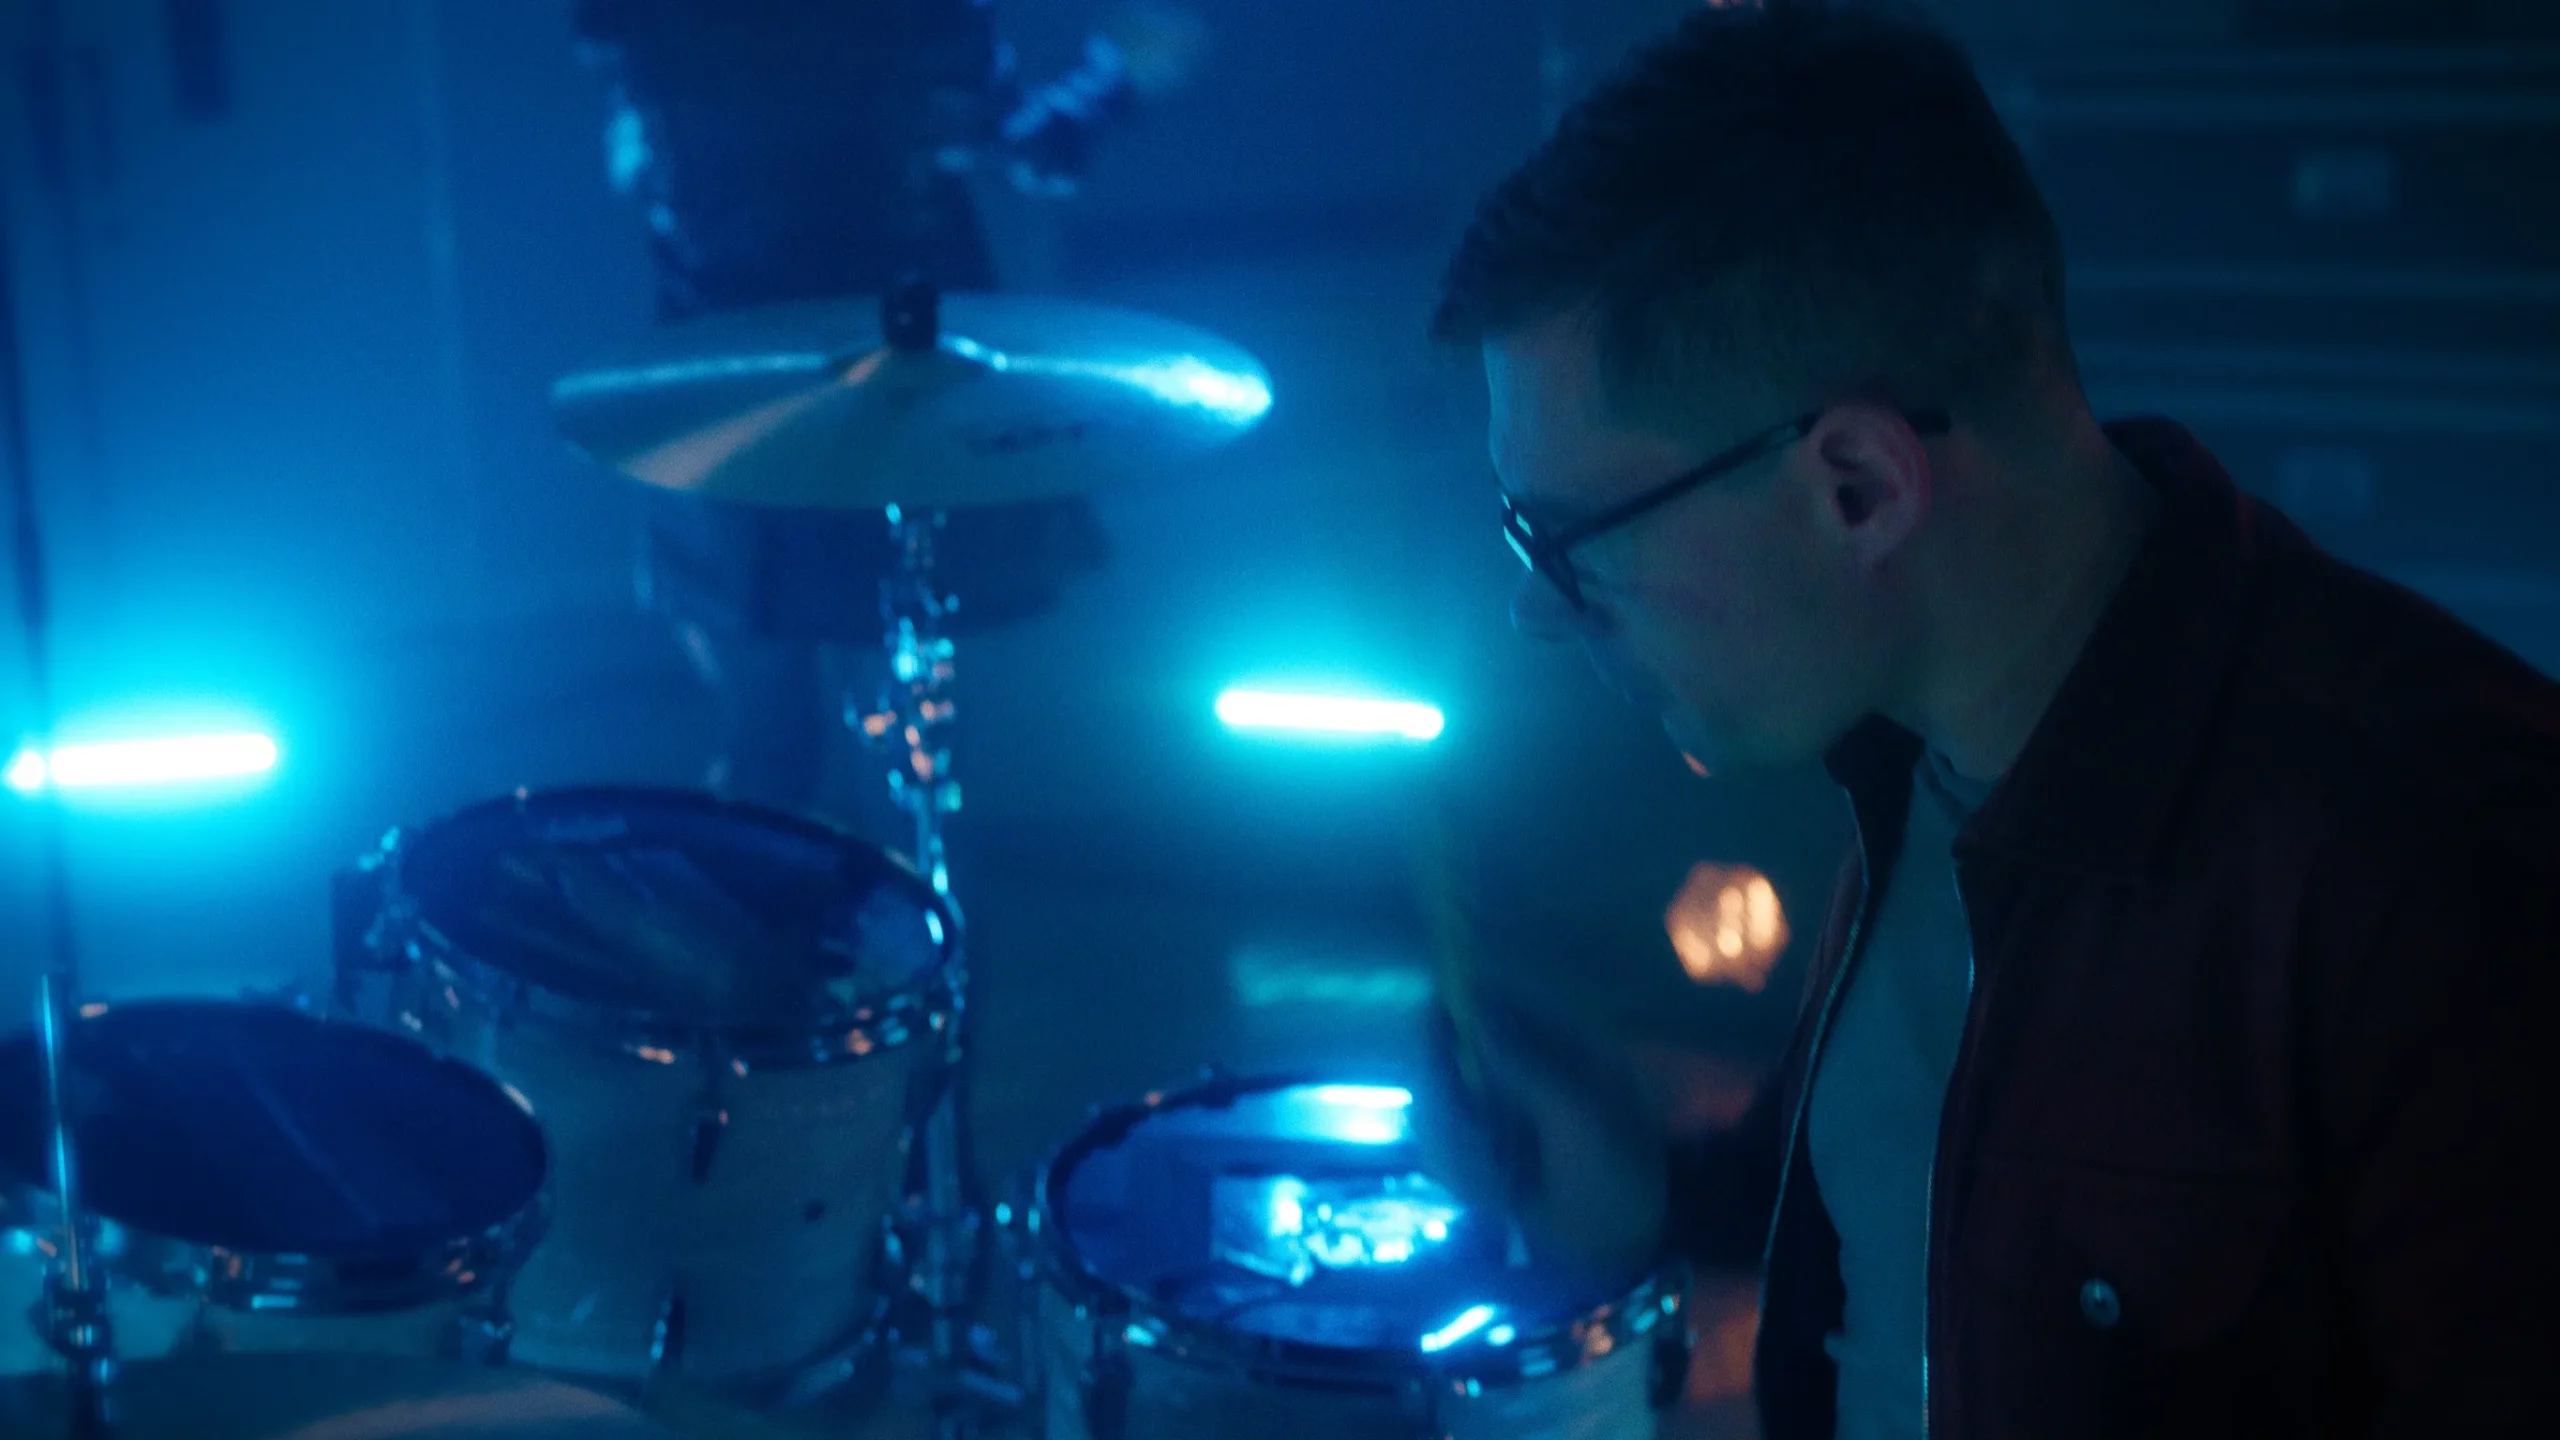 Performer in FLYNT's music video shoot by KINØ playing the drums